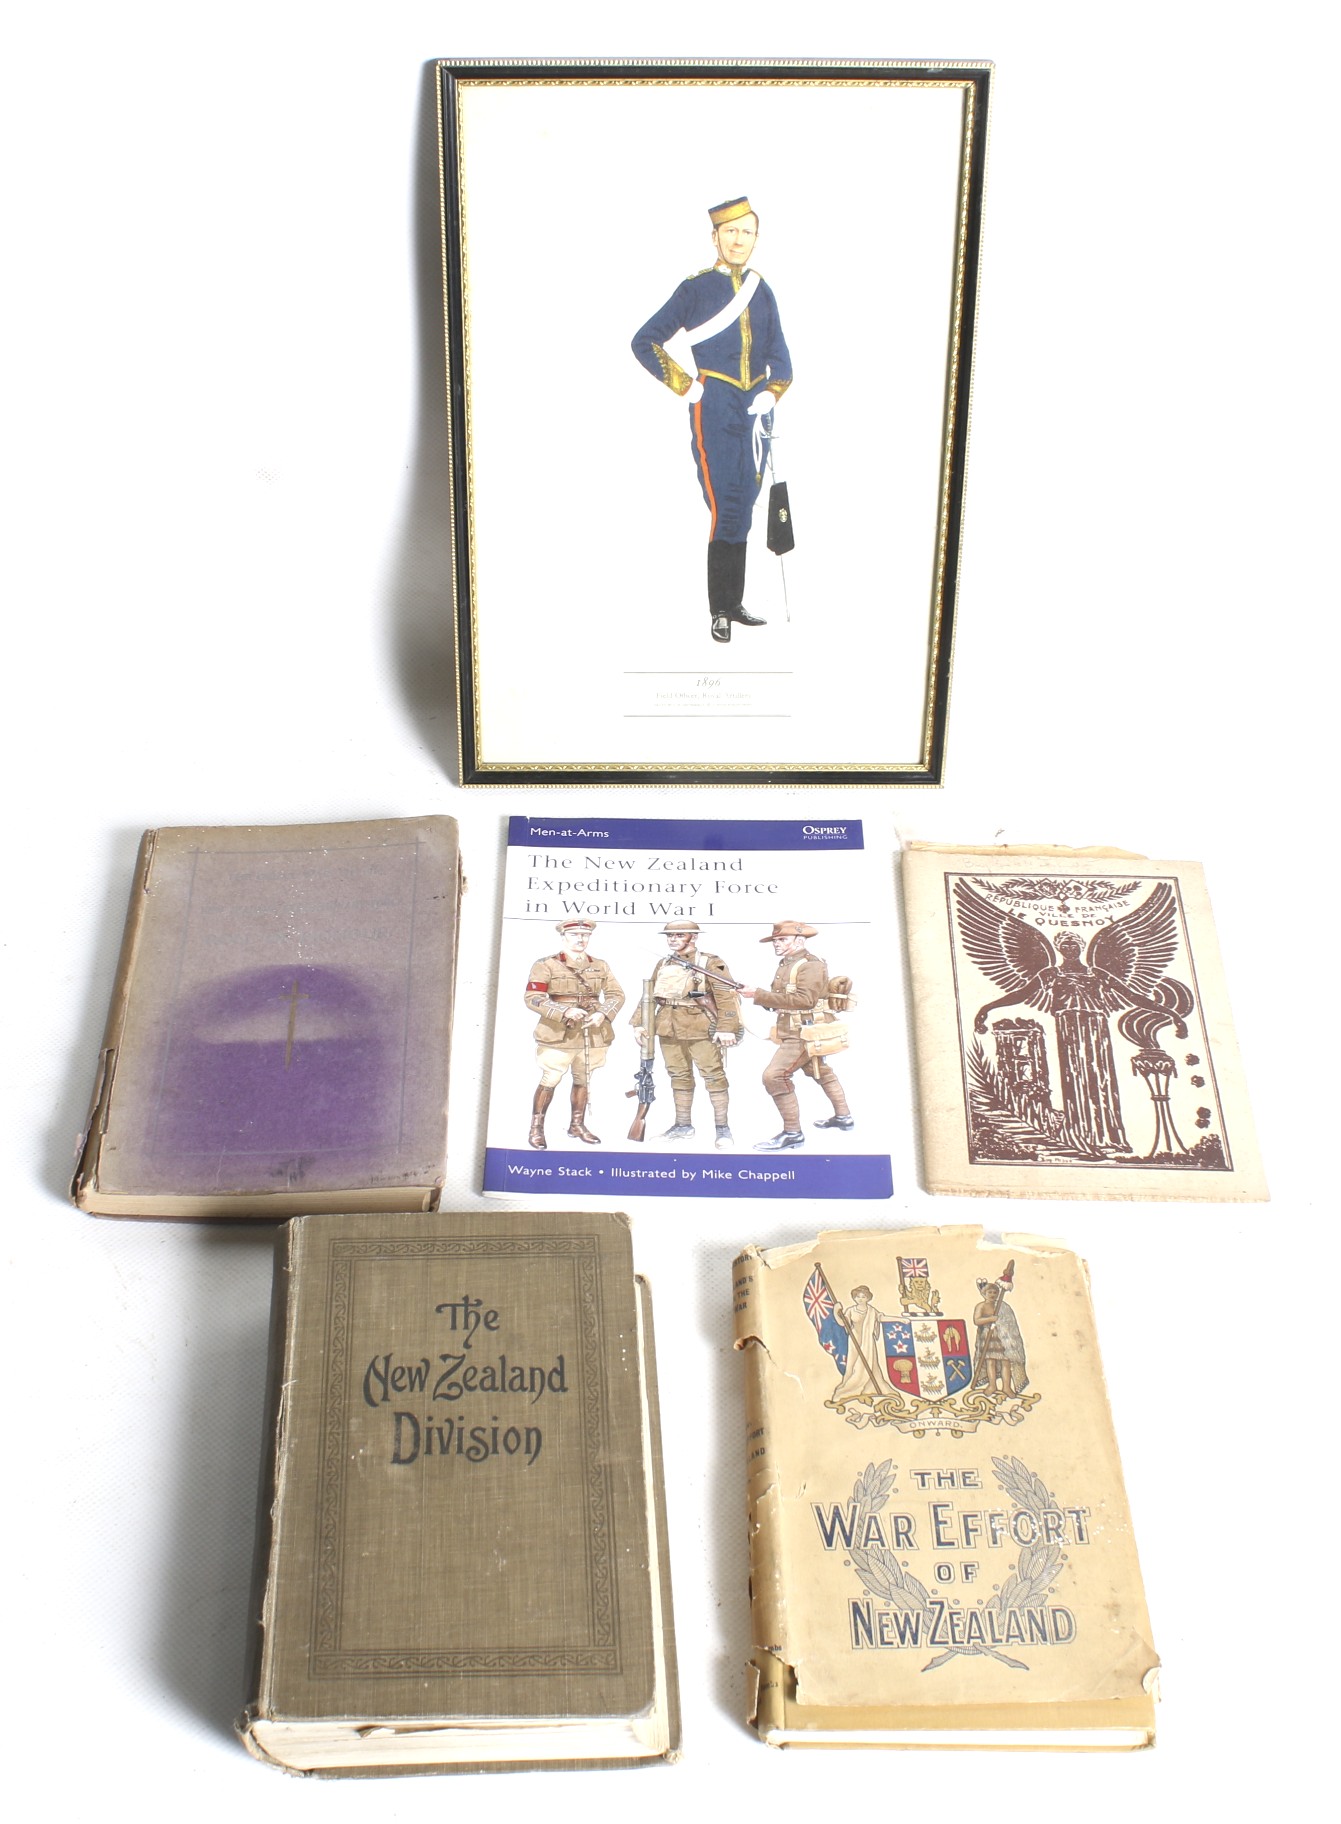 Five books and a print relating to circa 1900 military.